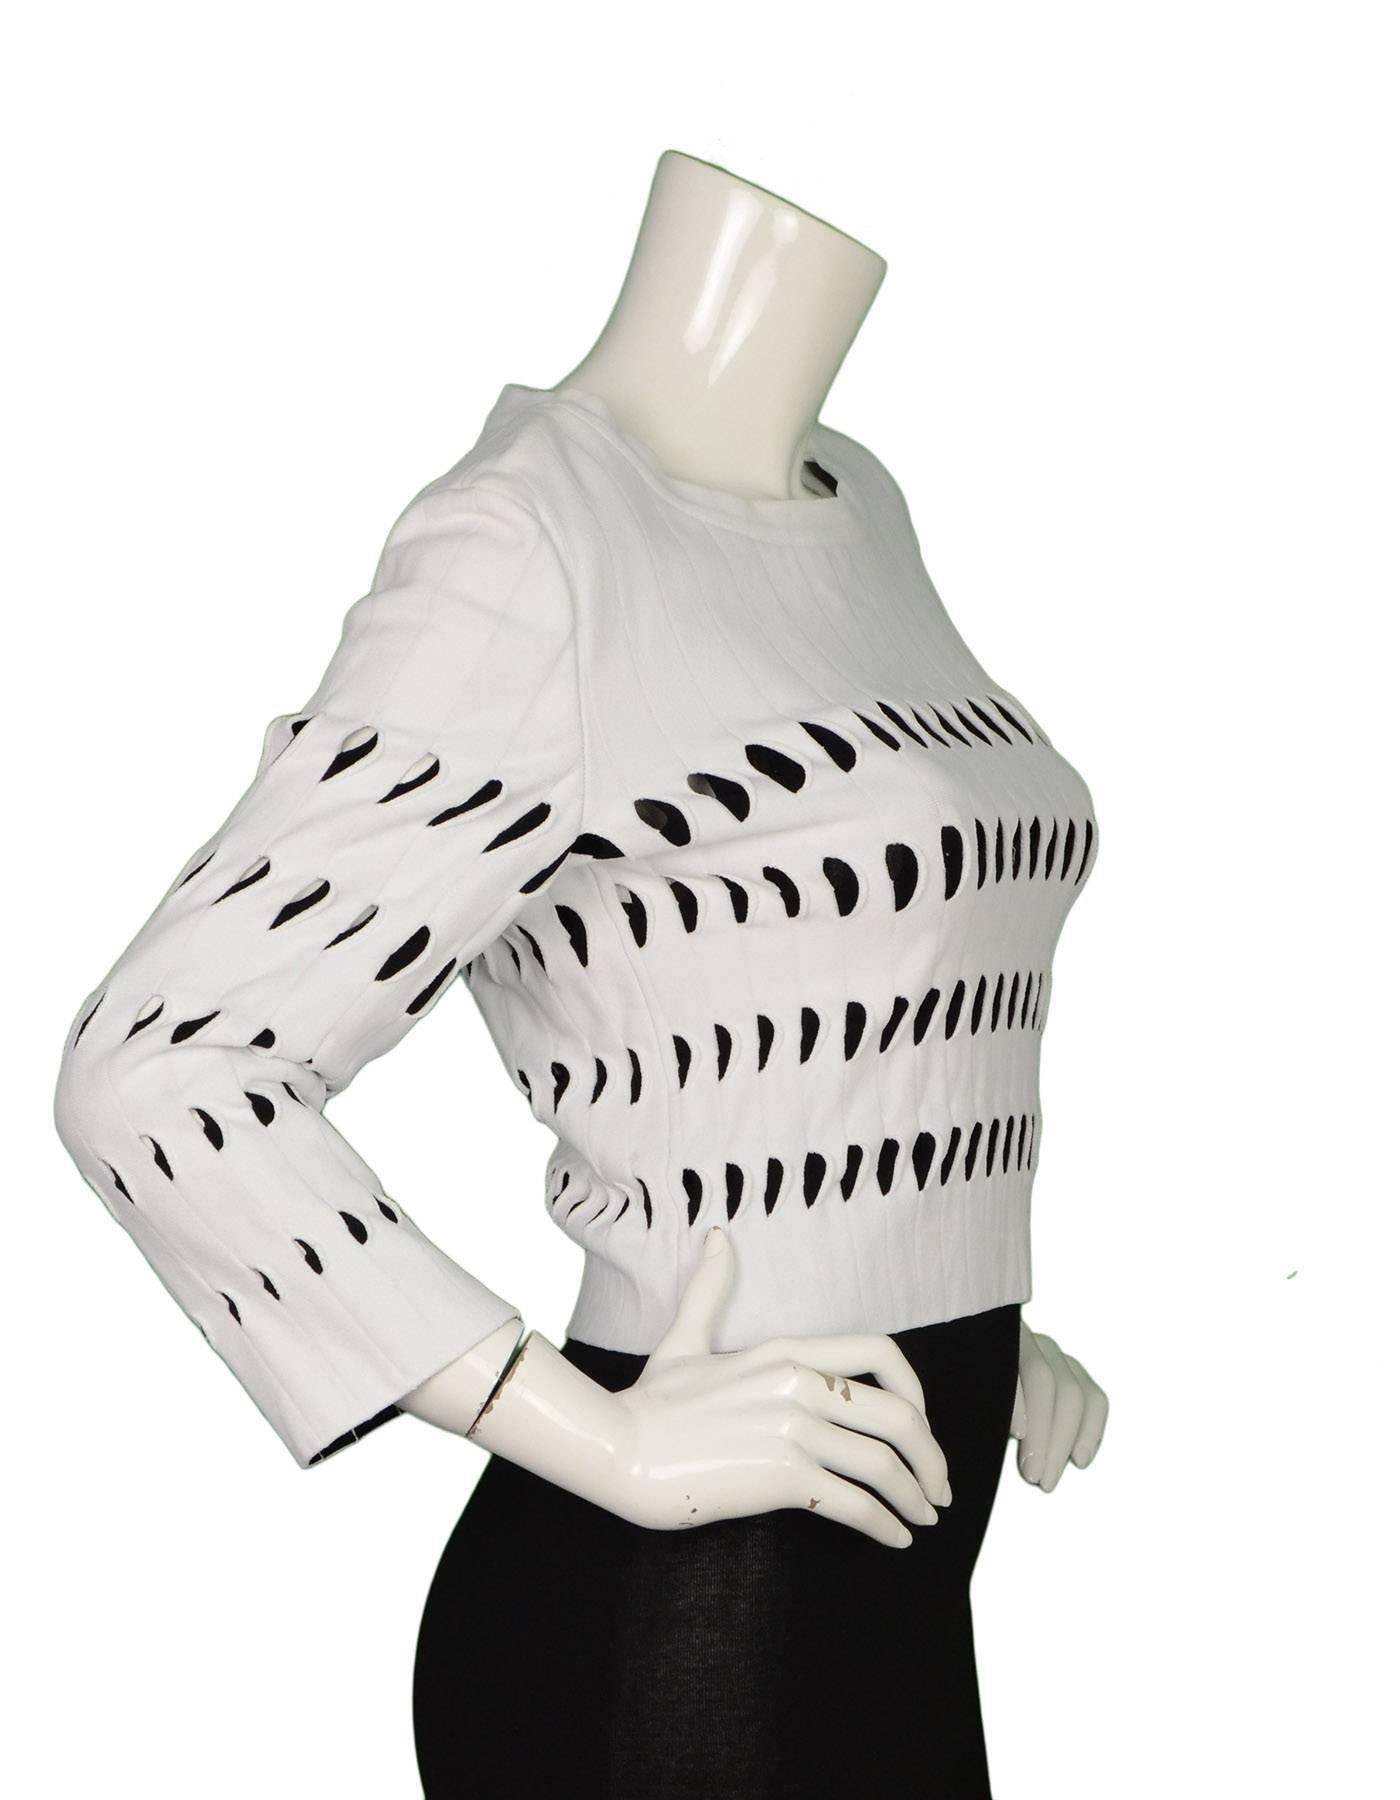 Alaia White & Black Cut-Out Cropped Top 
Features black underlay at cutouts
Made In: Italy
Color: White and black
Composition: 83% viscose, 17% polyester
Lining: None
Closure/Opening: Side zipper
Exterior Pockets: None
Interior Pockets: